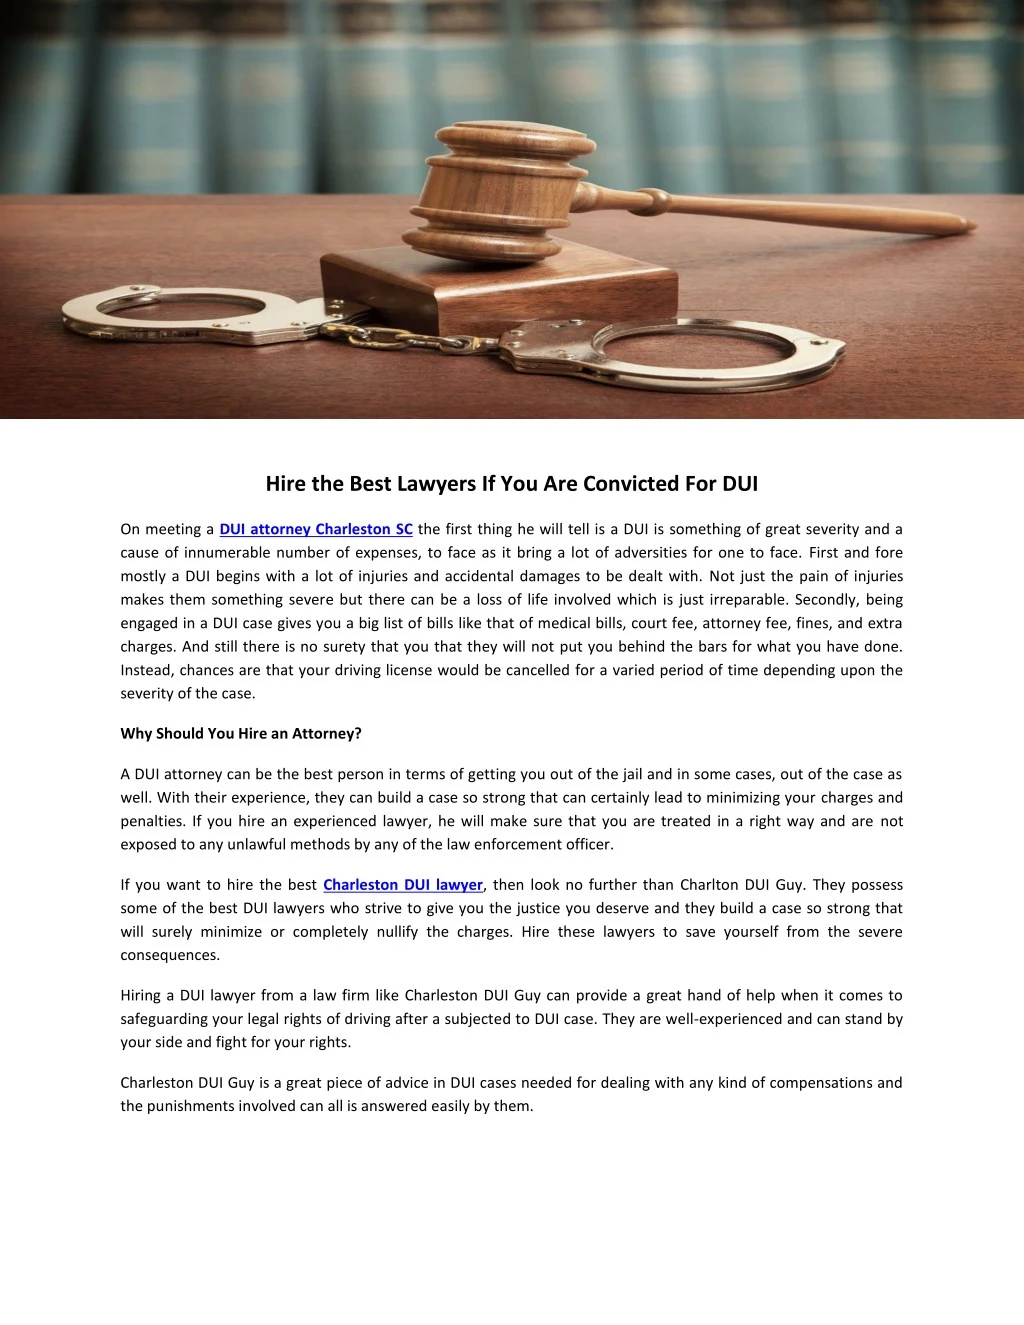 hire the best lawyers if you are convicted for dui